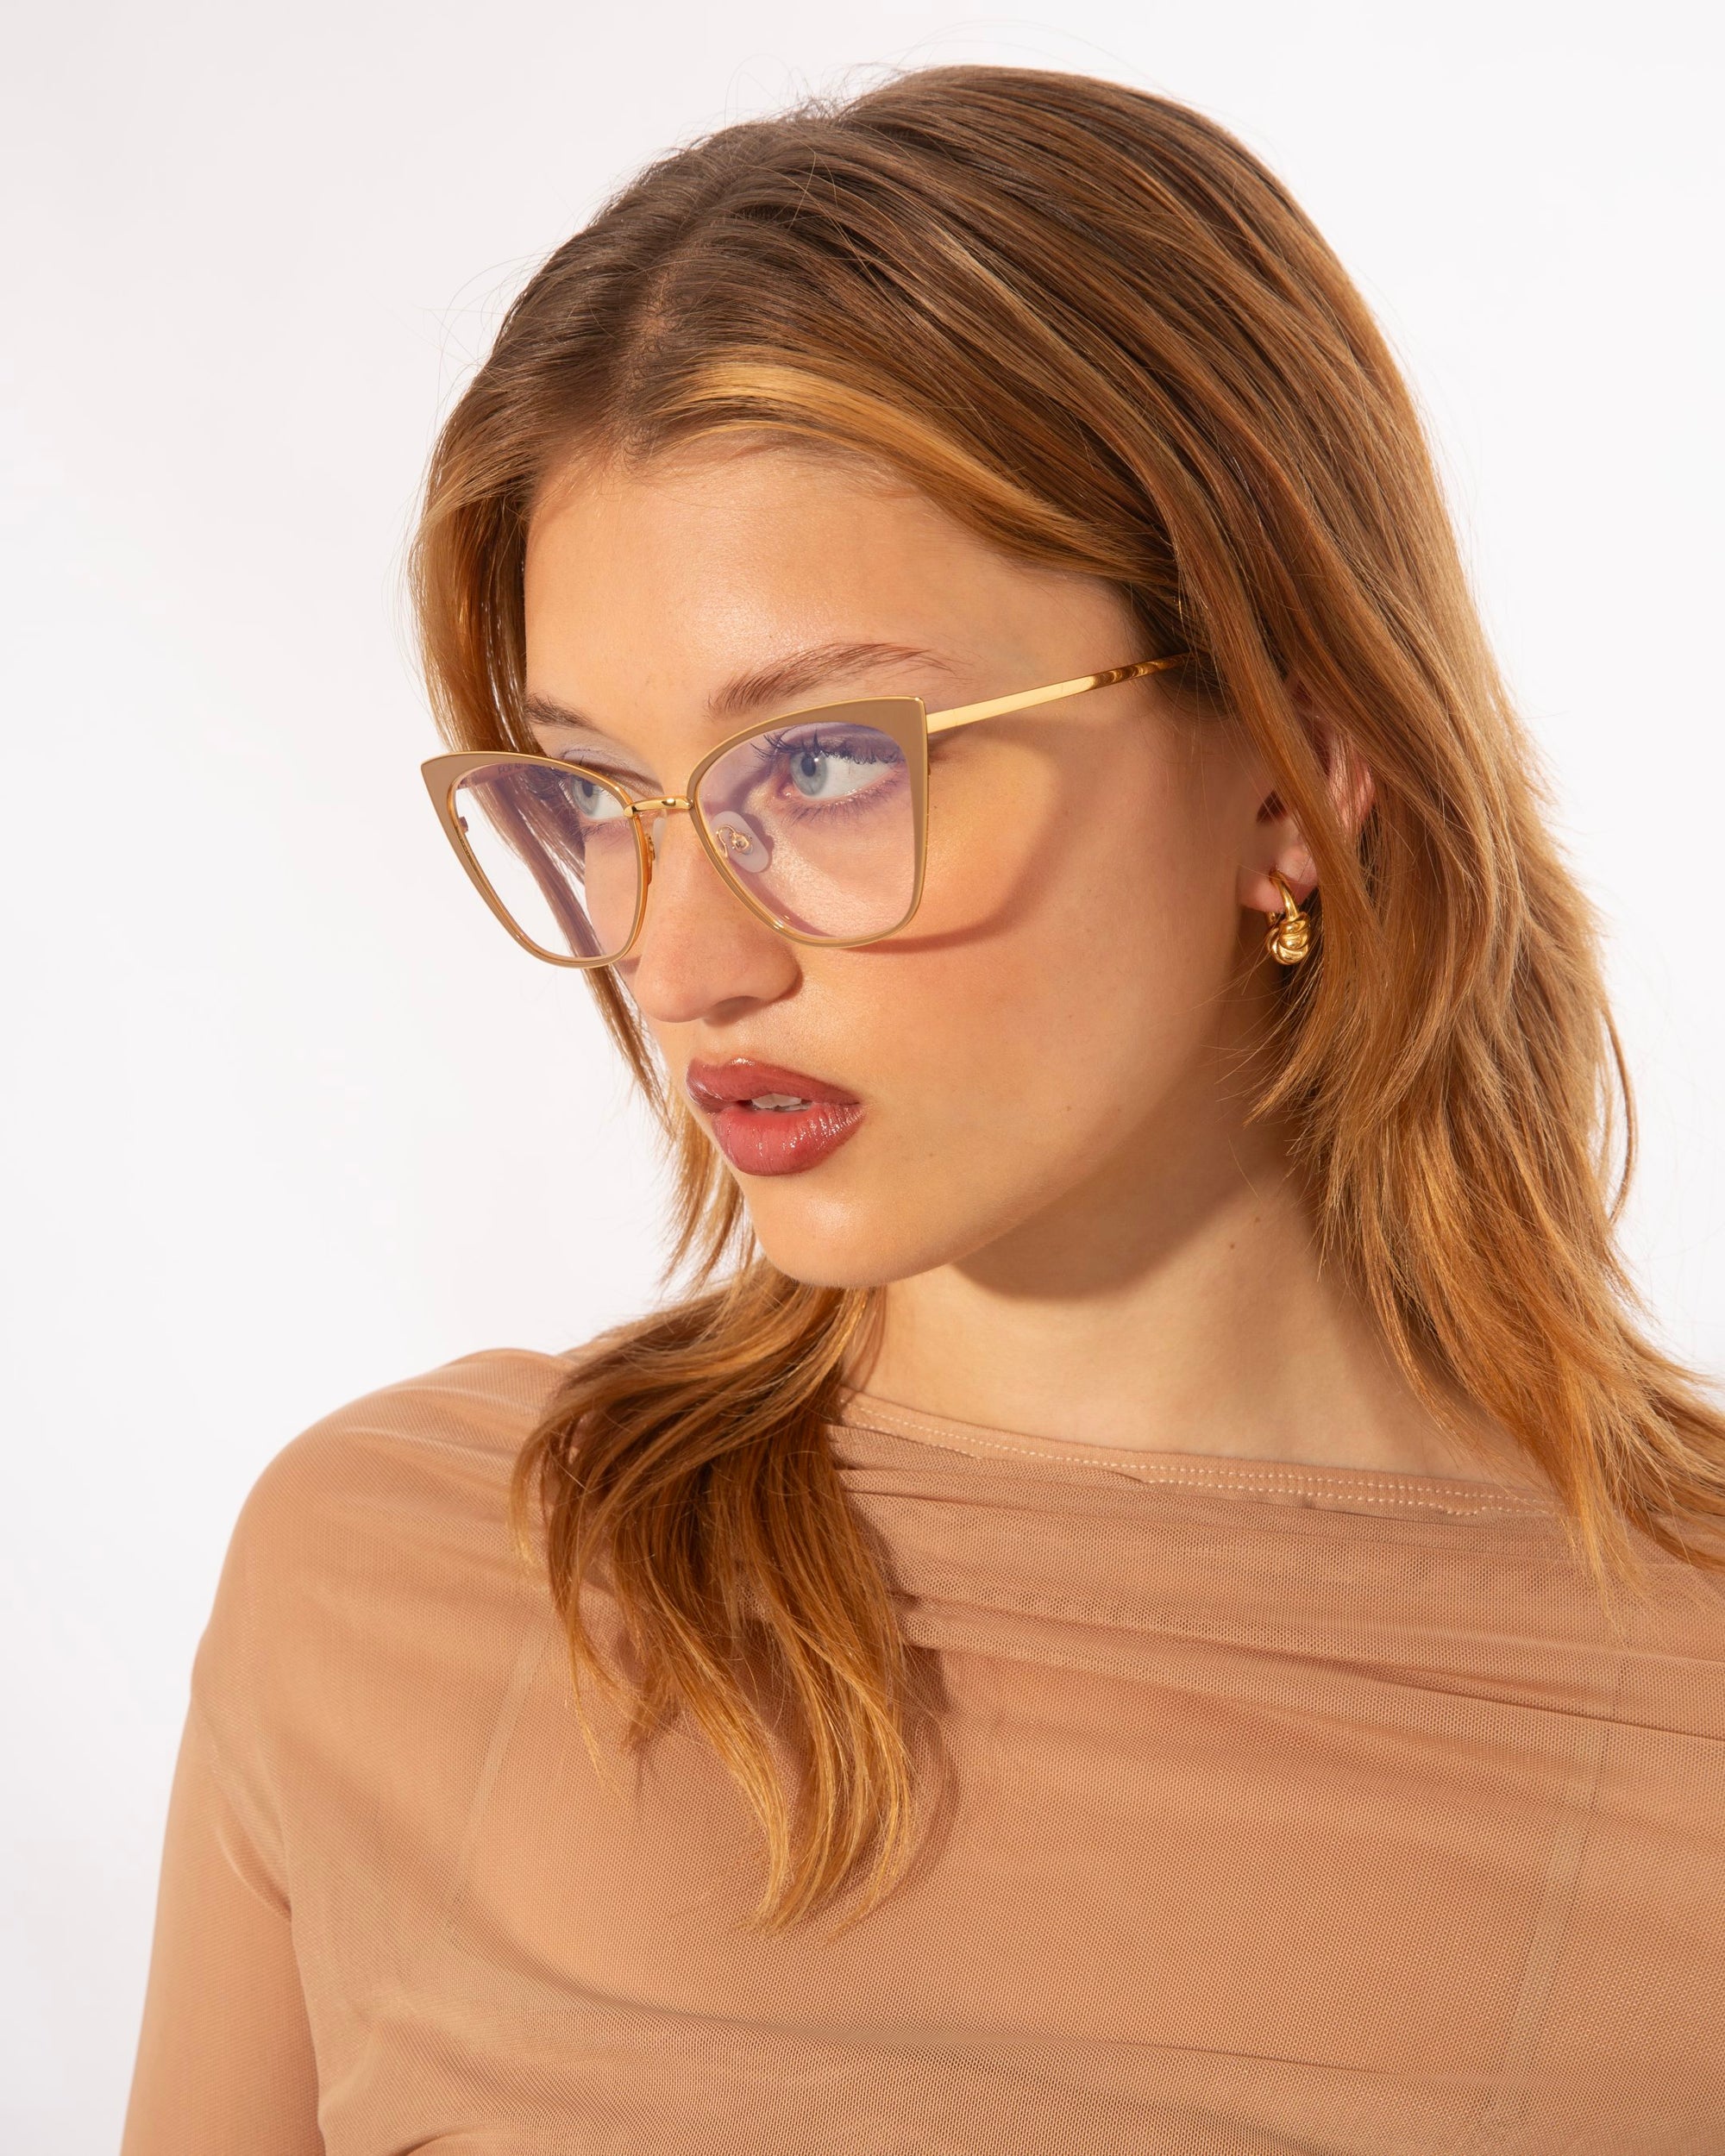 A woman with light brown hair wearing stylish, oversized glasses with a Blue Light Filter and small 14kt gold plated hoop earrings looks slightly to the side. She is dressed in a sheer, beige top. She is wearing Stella Two by For Art&#39;s Sake®. The background is plain white, giving a clean and minimalist aesthetic to the image.